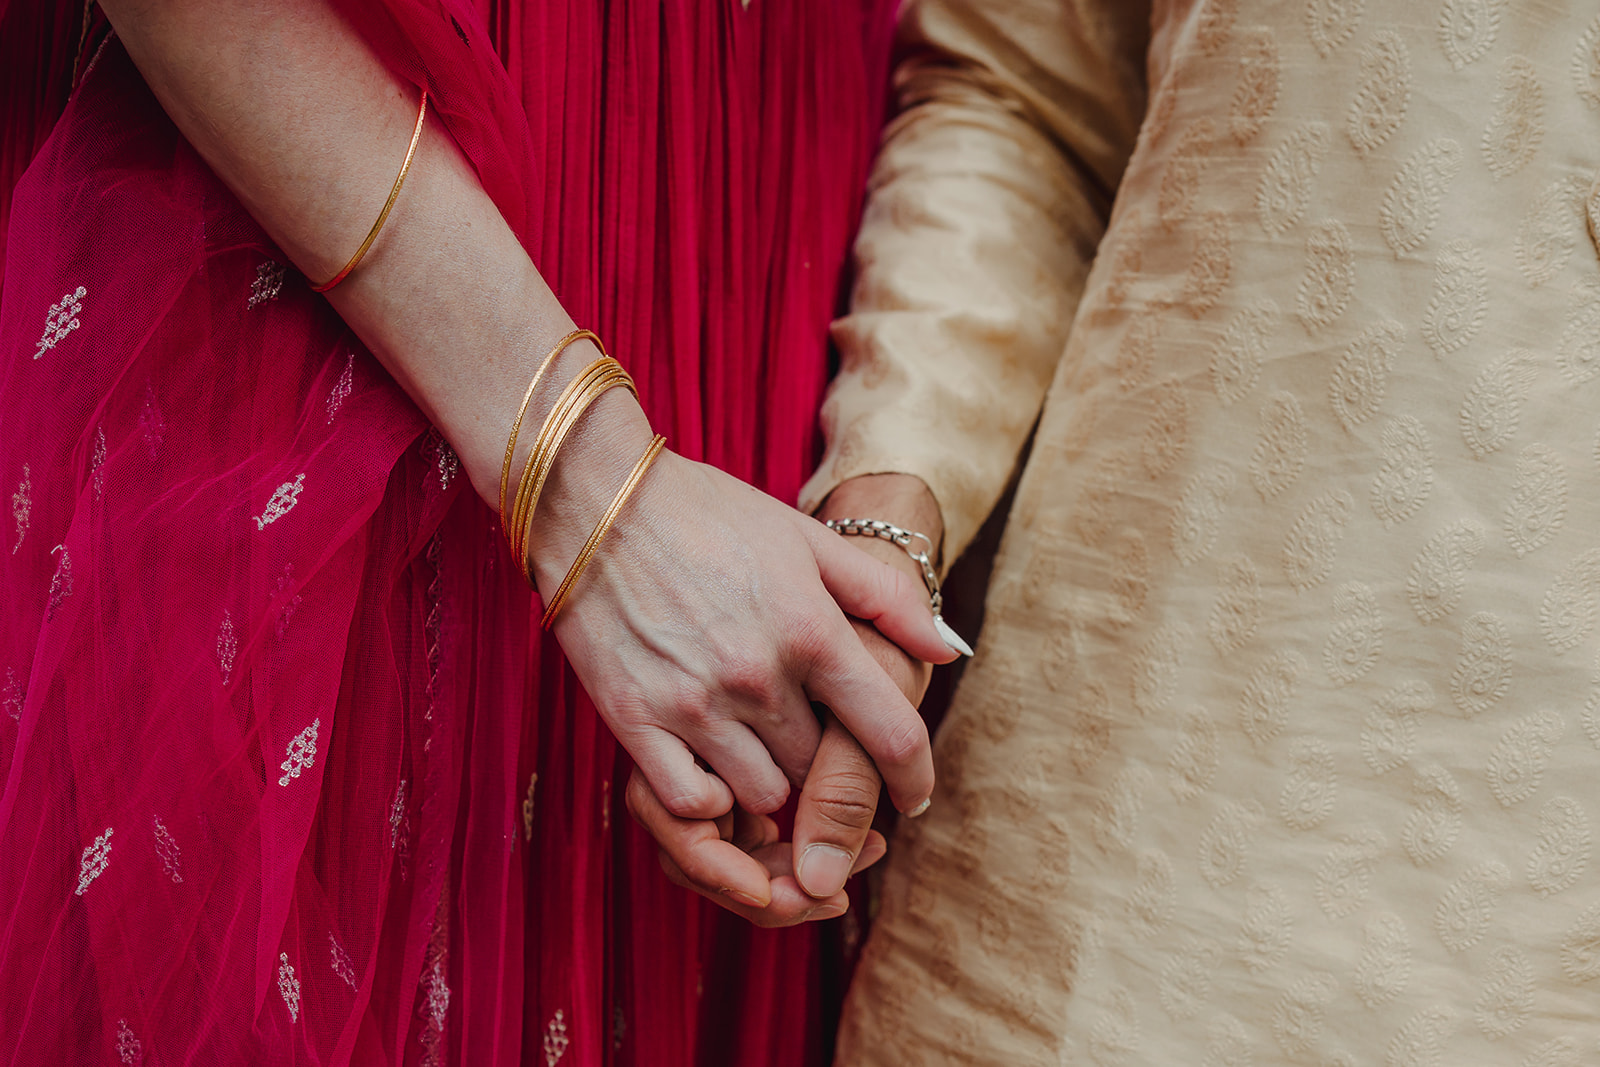 the beautiful moments of a bride and groom as they embark on a memorable journey together, hand in hand.